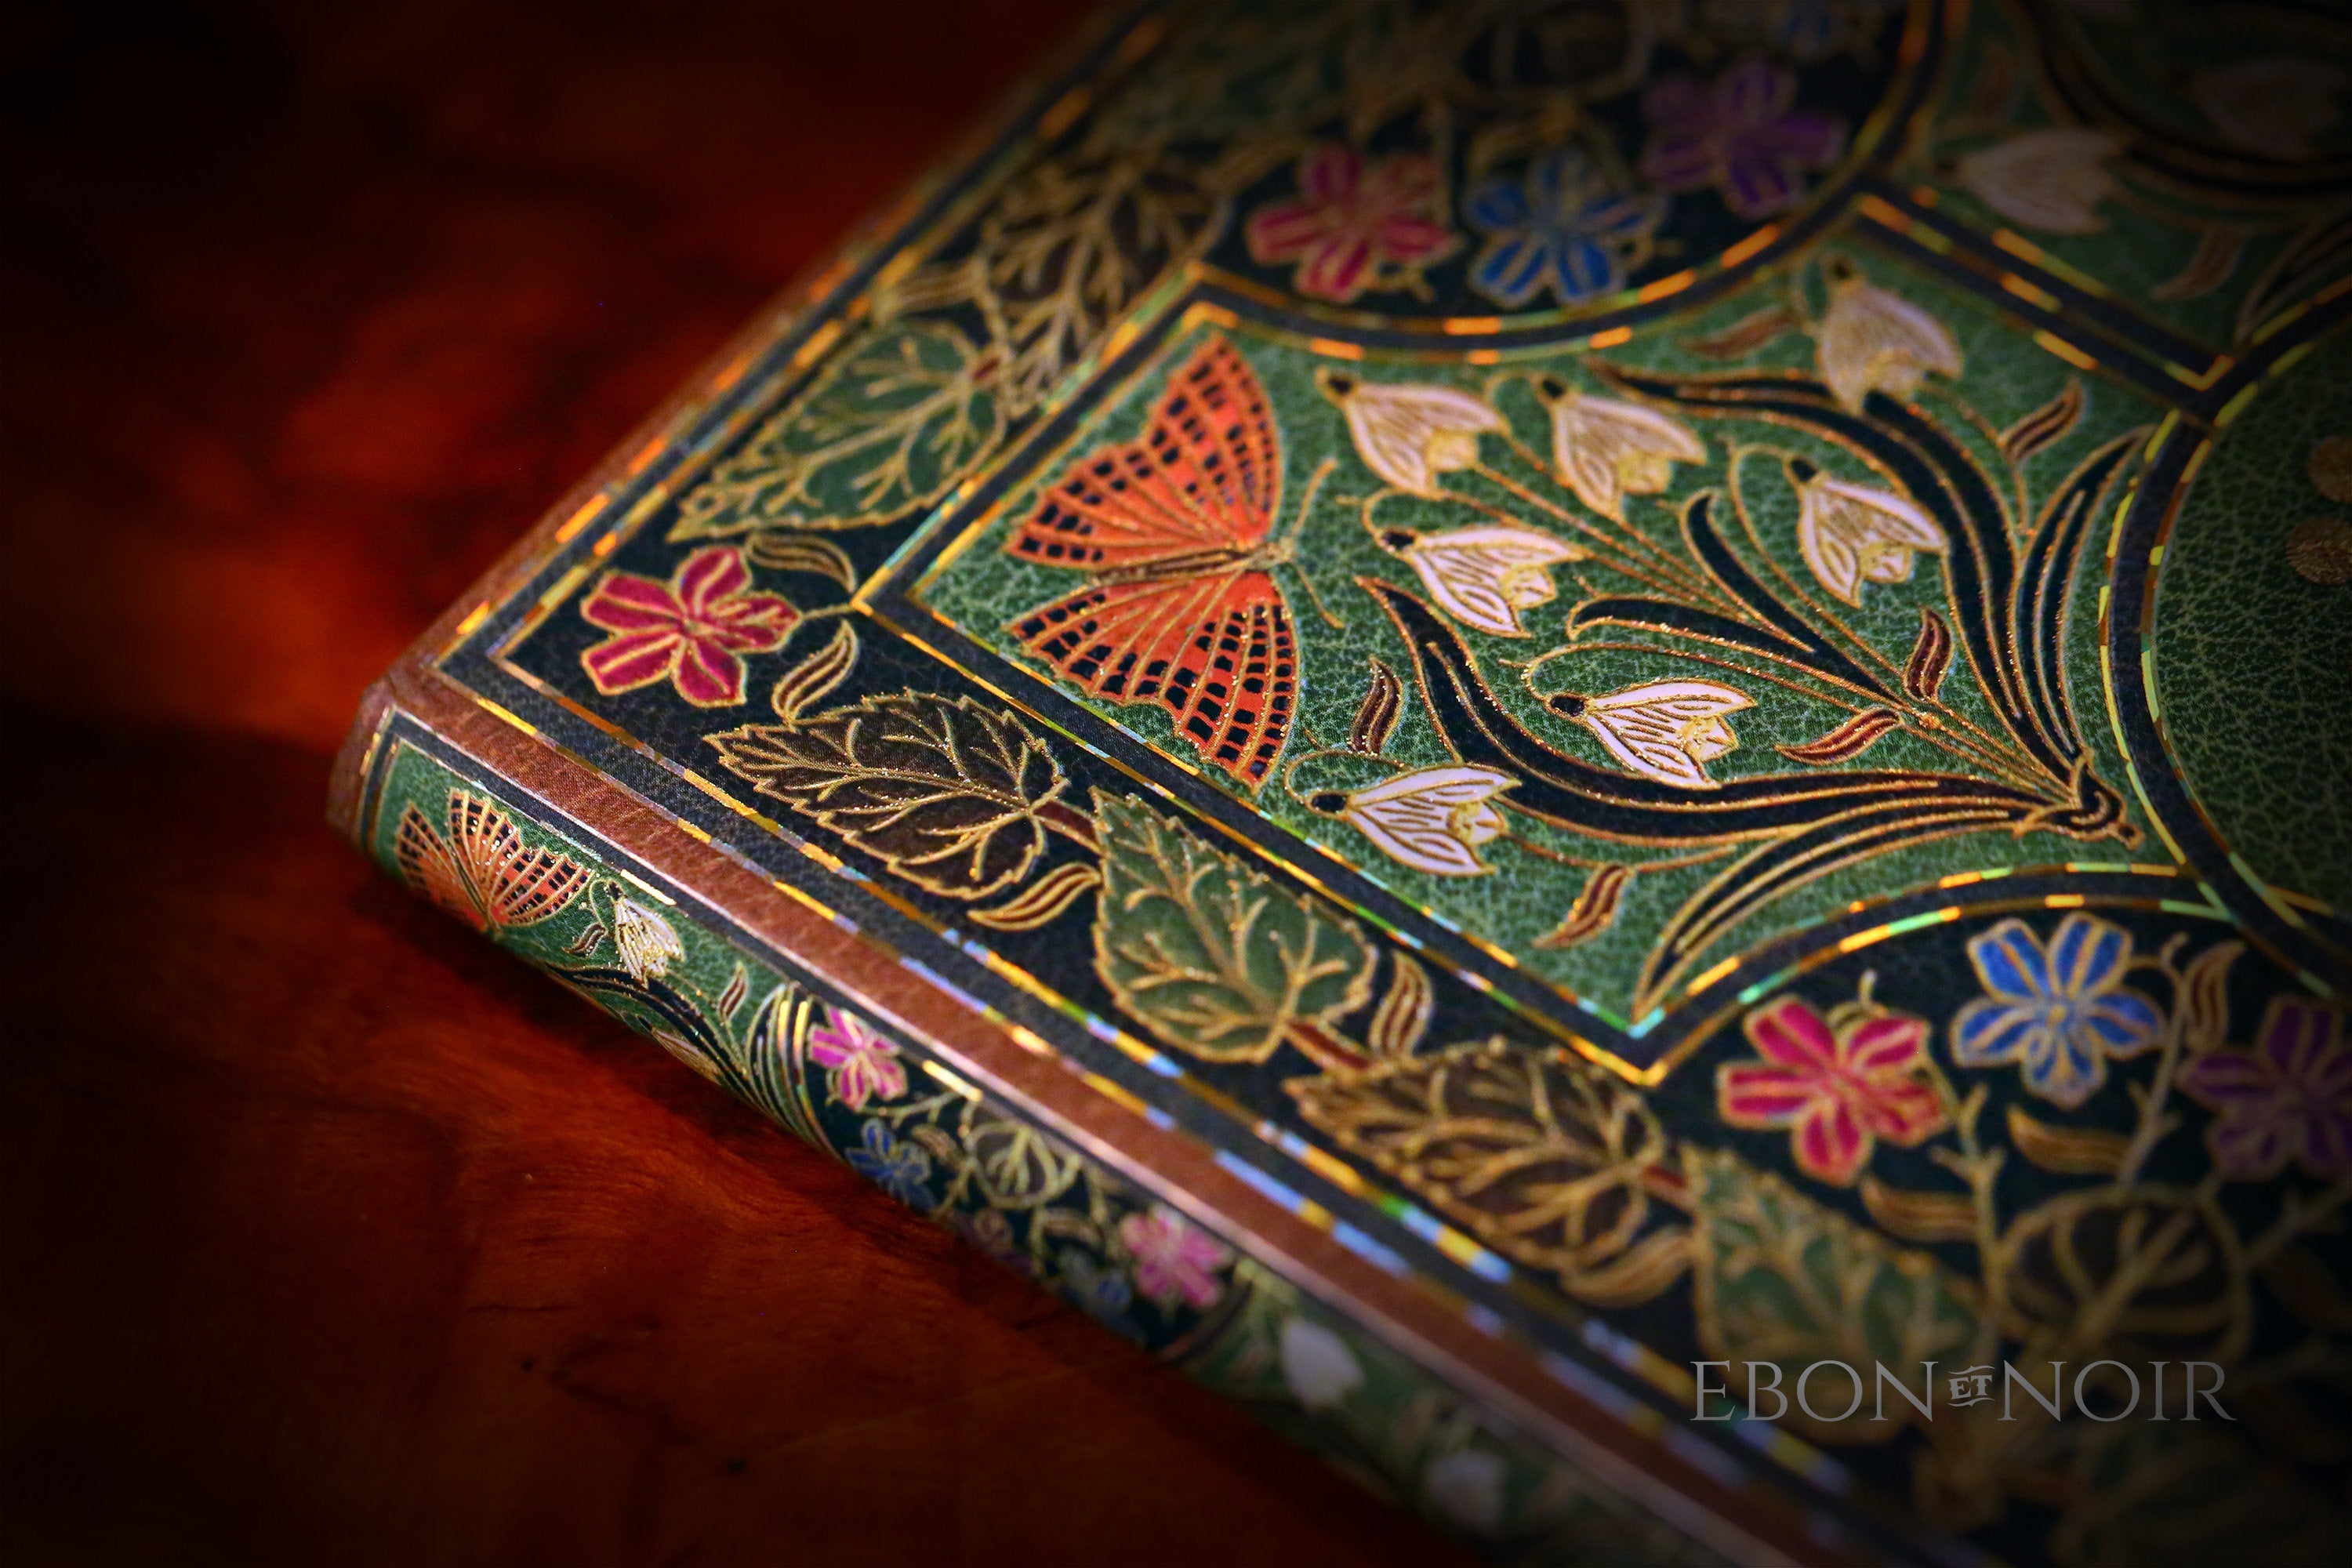 Poetry in Bloom, Elegant Journal with Prismatic Accents and Metal Clasp Closures, Lined, Paperblanks, 9in x 7in